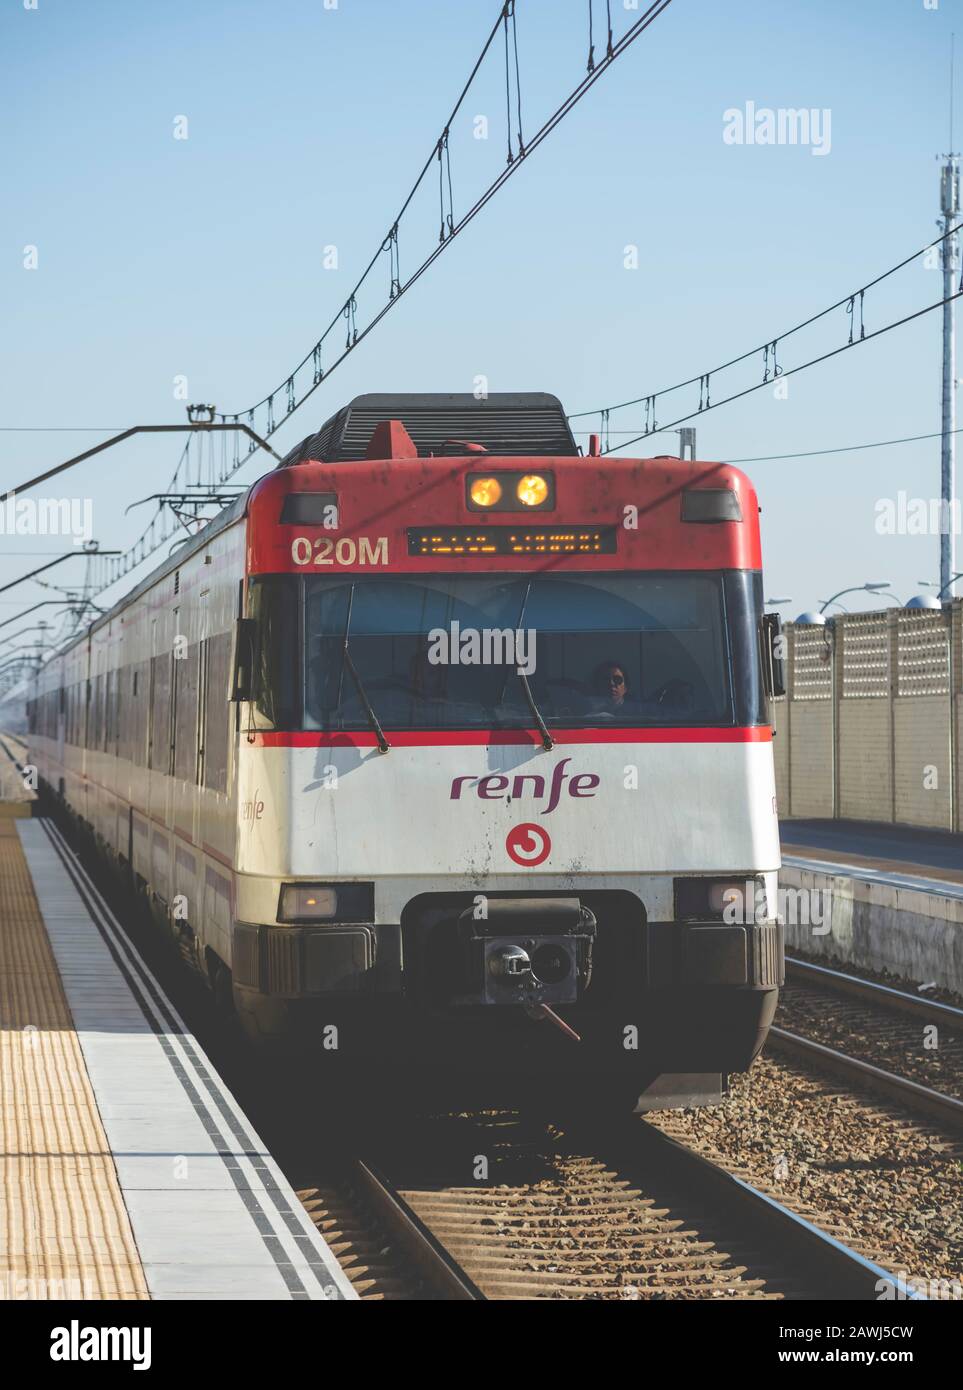 Alcala de Henares train station, Madrid province, Spain; Feb/25/2019; Trains passing by the station of Alcala de Henares, Madrid province, Spain Stock Photo